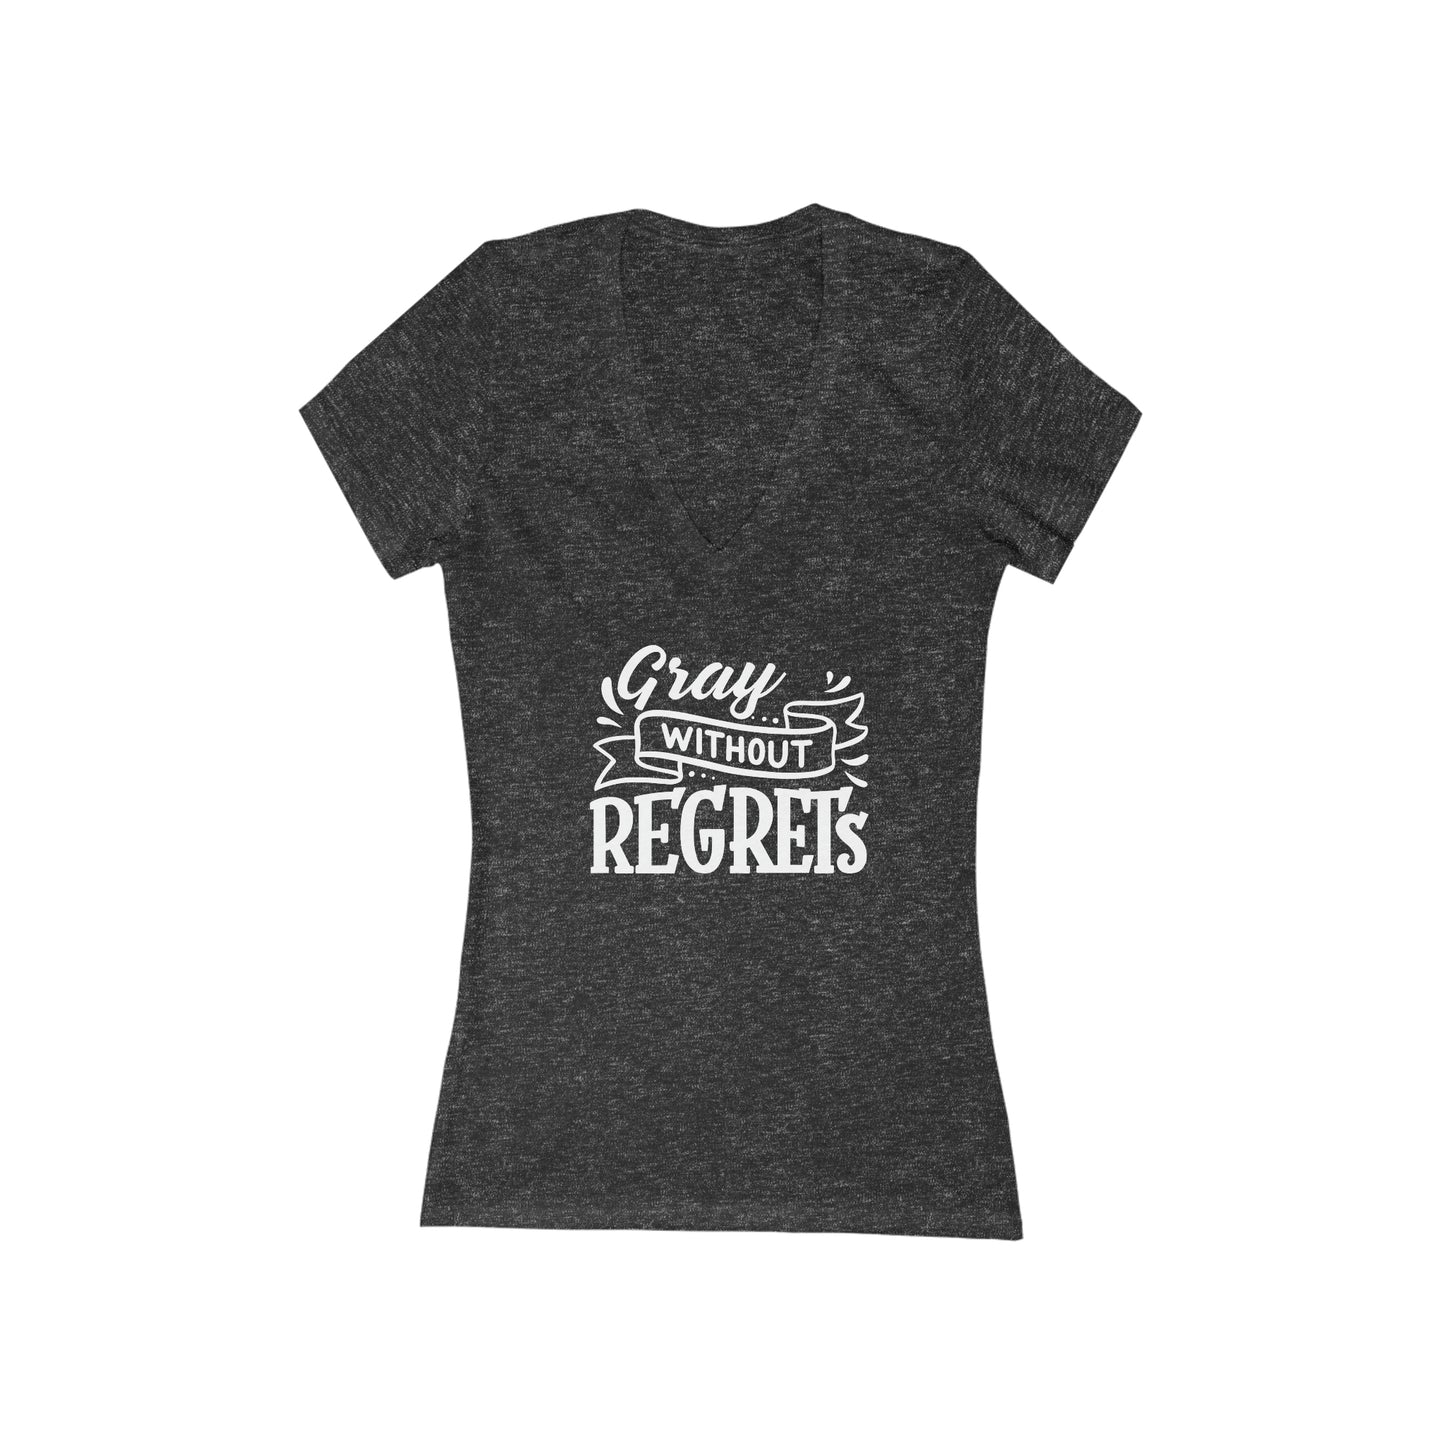 GRAY Without Regrets, short sleeve deep v-neck t-shirt, for women embracing silver and gray hair